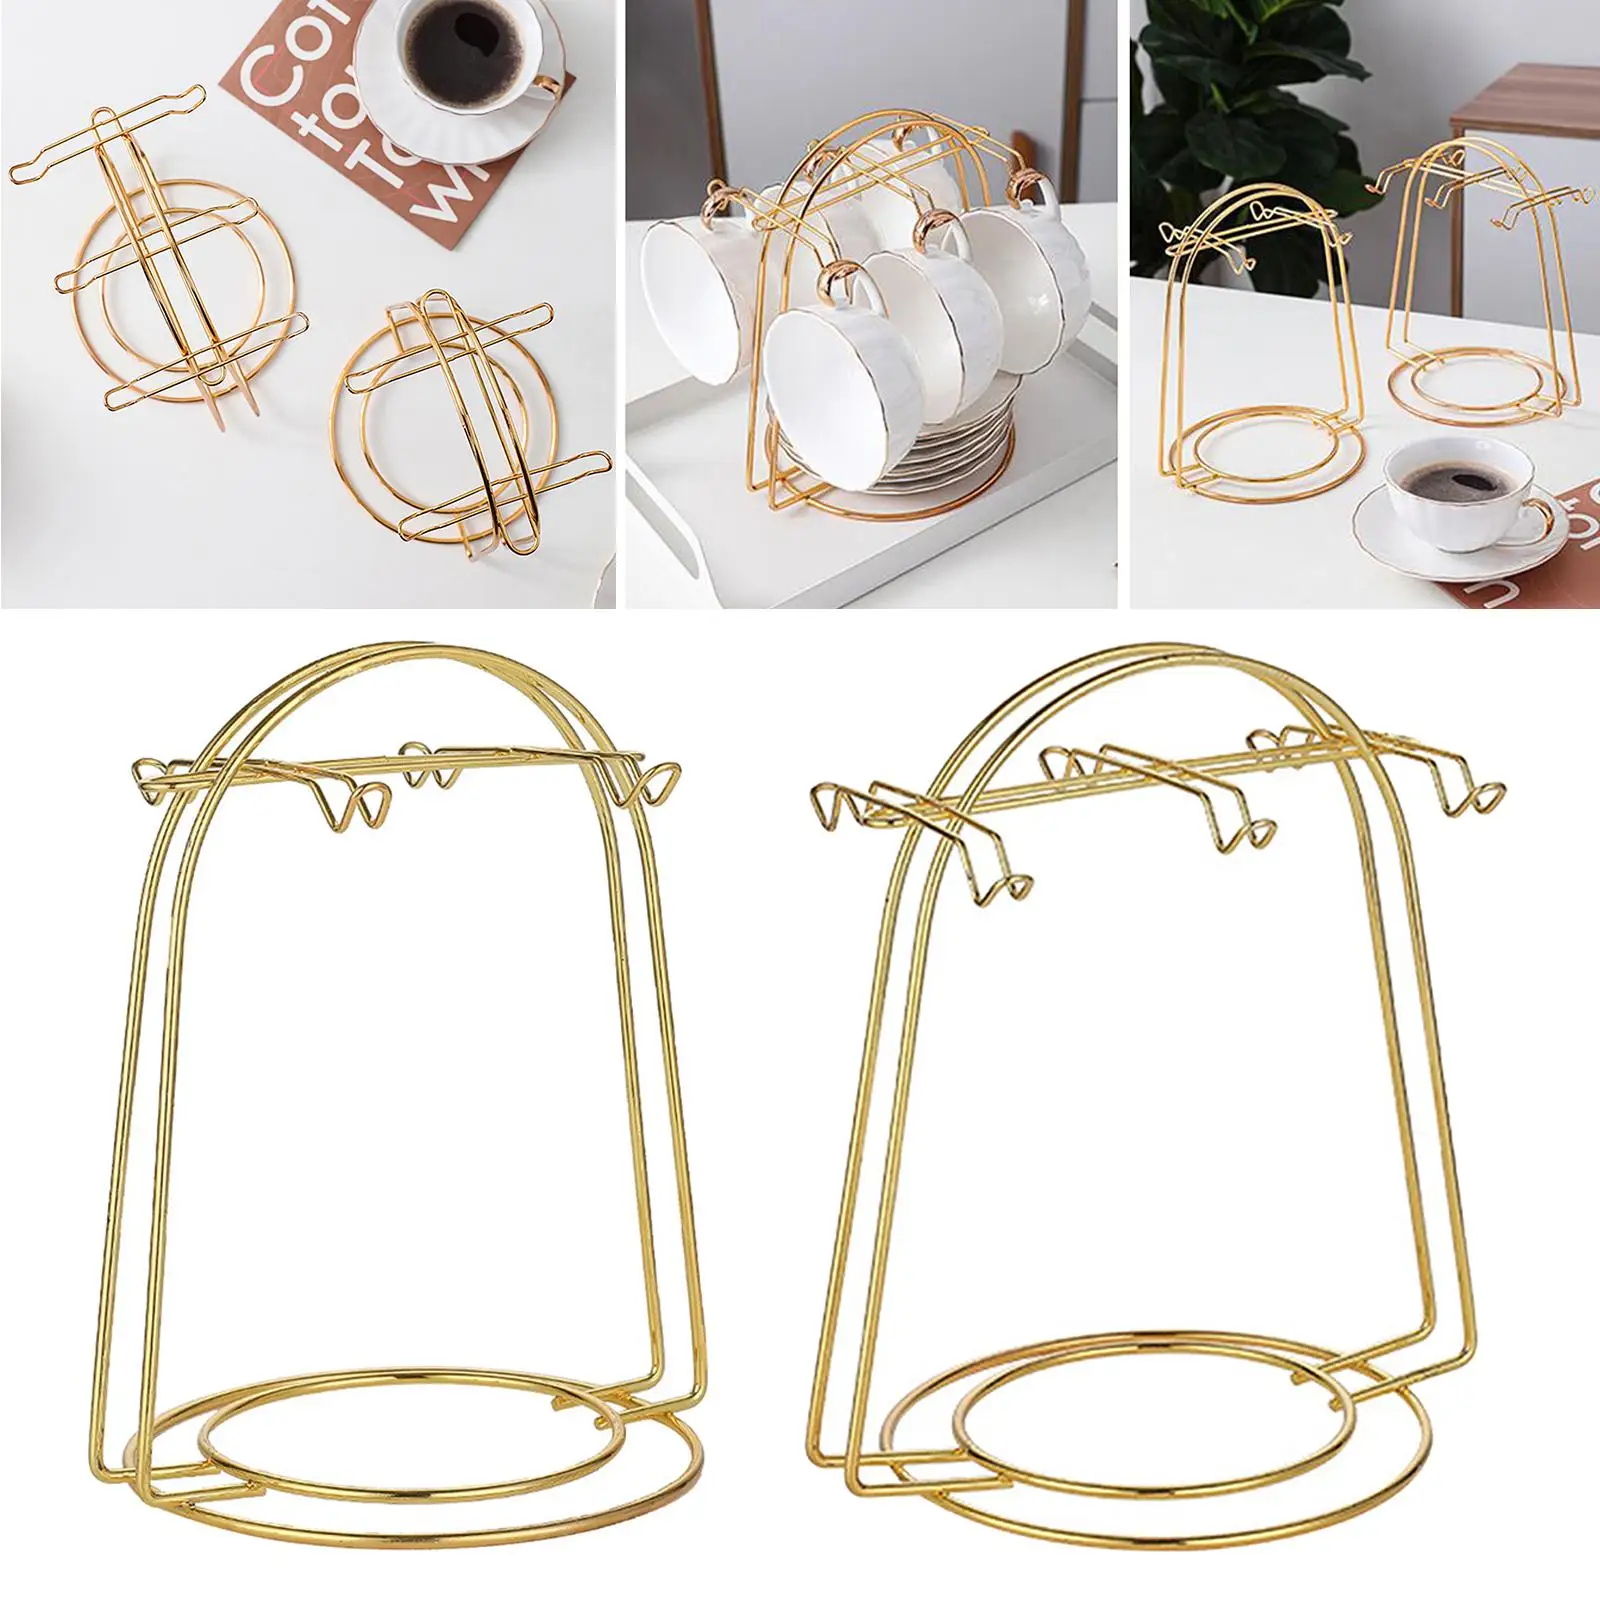 Portable Tea Cup and Saucer Display Rack for   Decoration Organizer